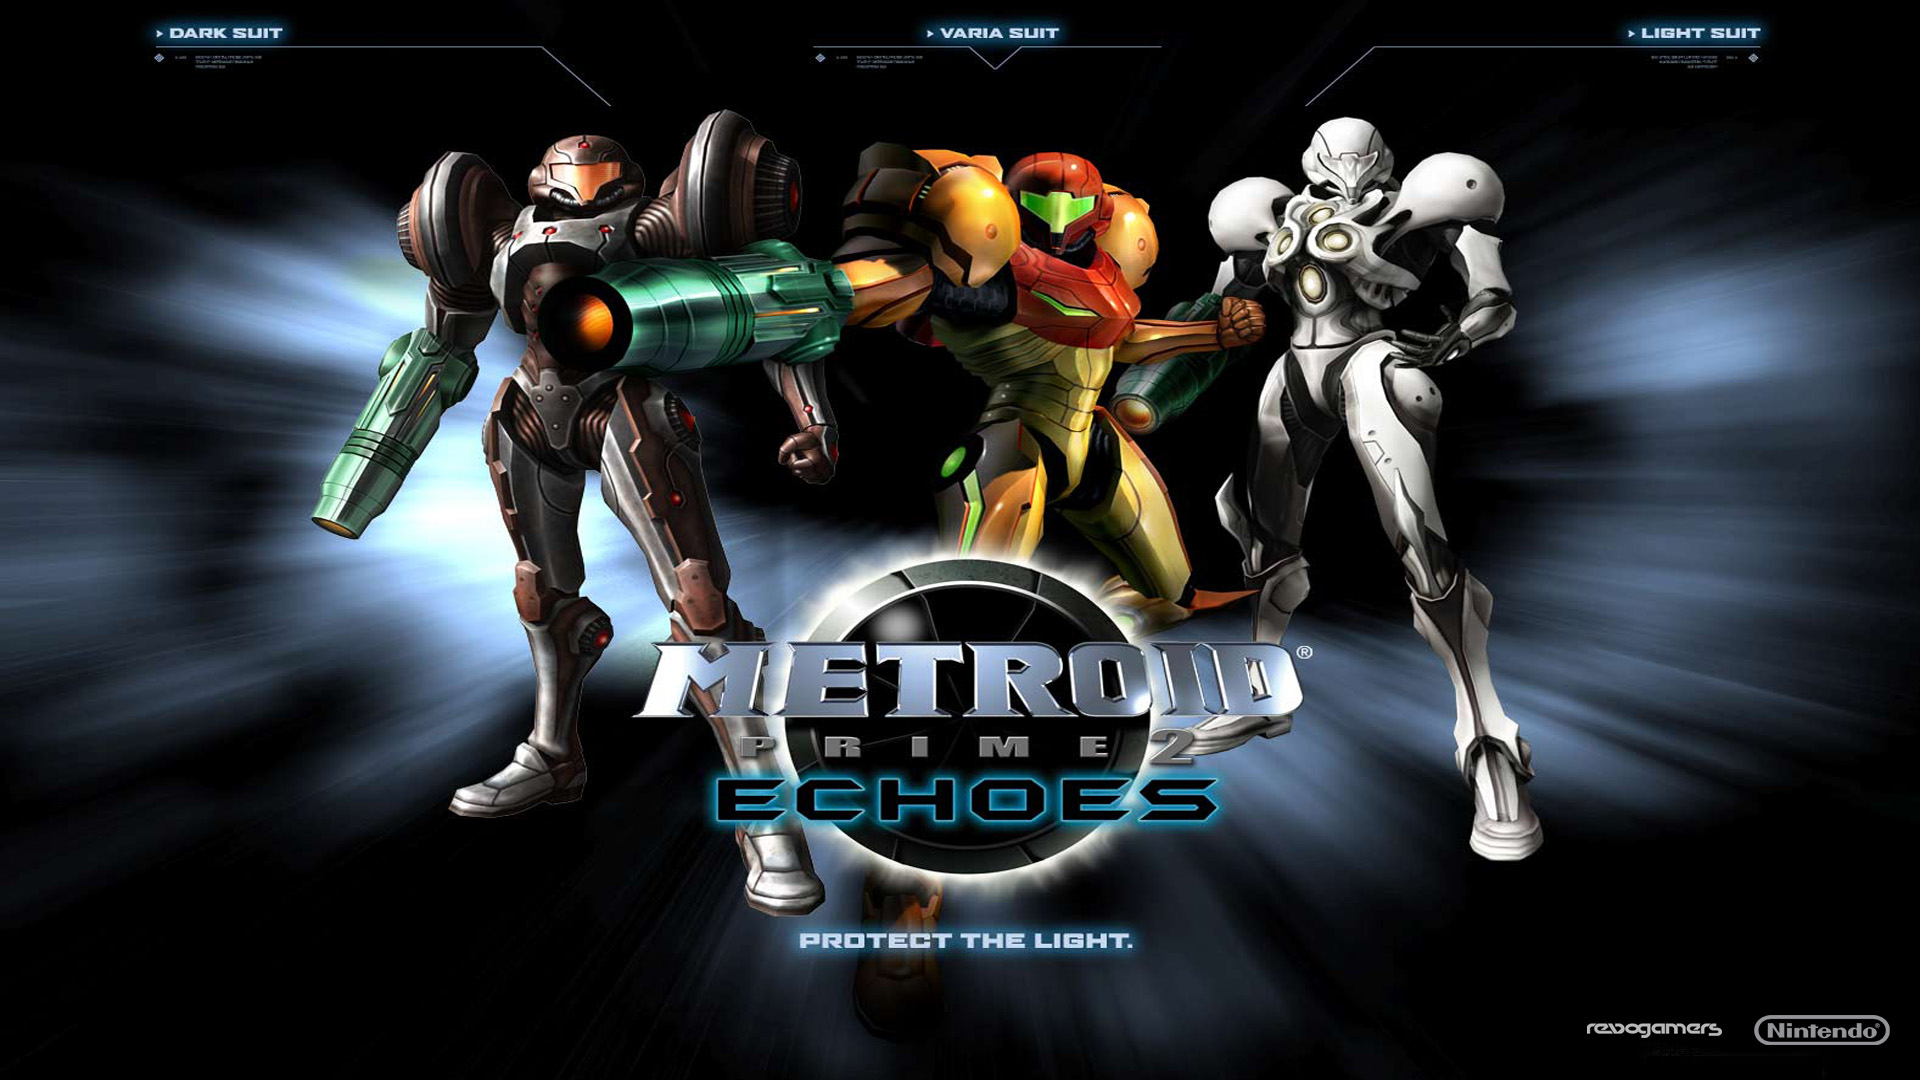 Video Game Metroid Prime 2: Echoes HD Wallpaper | Background Image